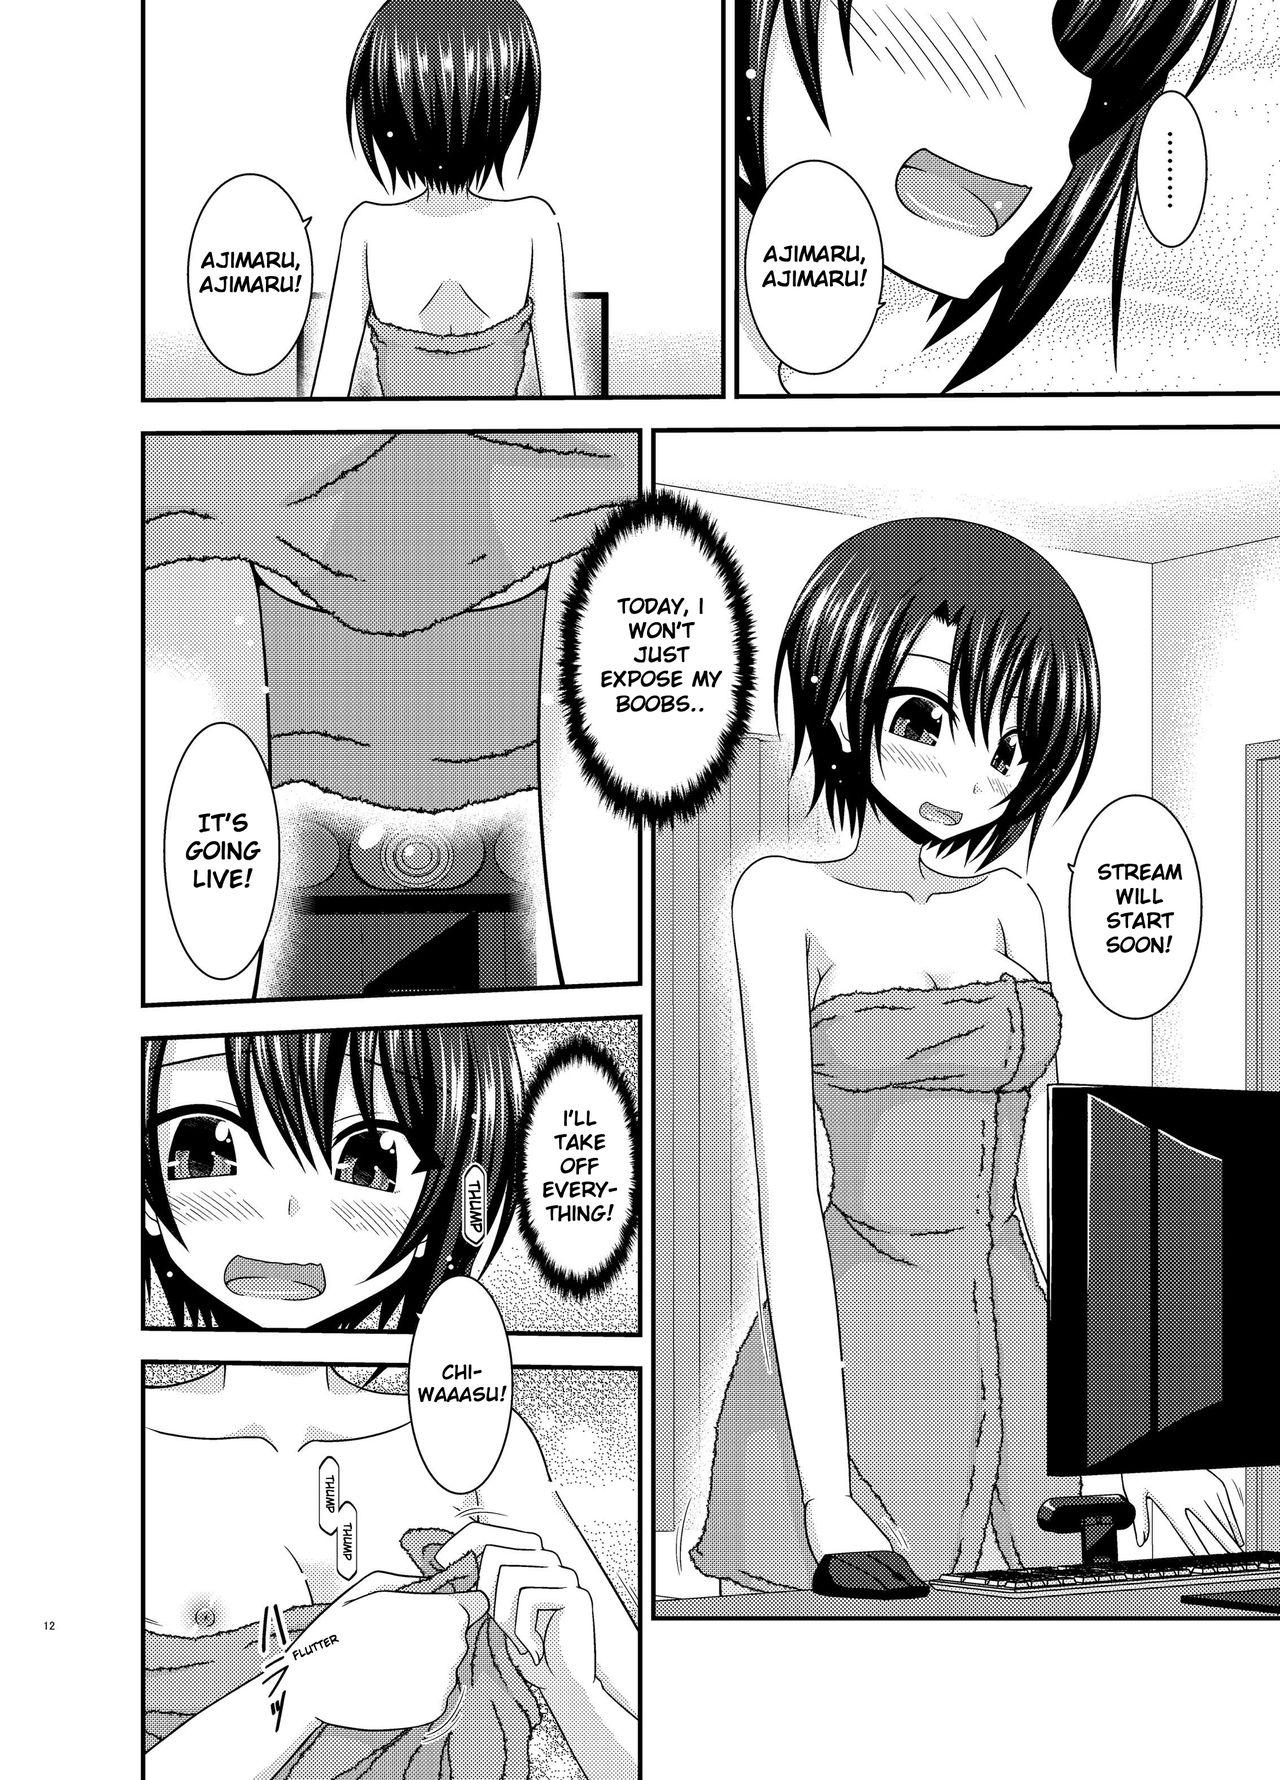 Whore Haishin Gamen no Mukougawa | The other side of the broadcast Gay Blondhair - Page 12